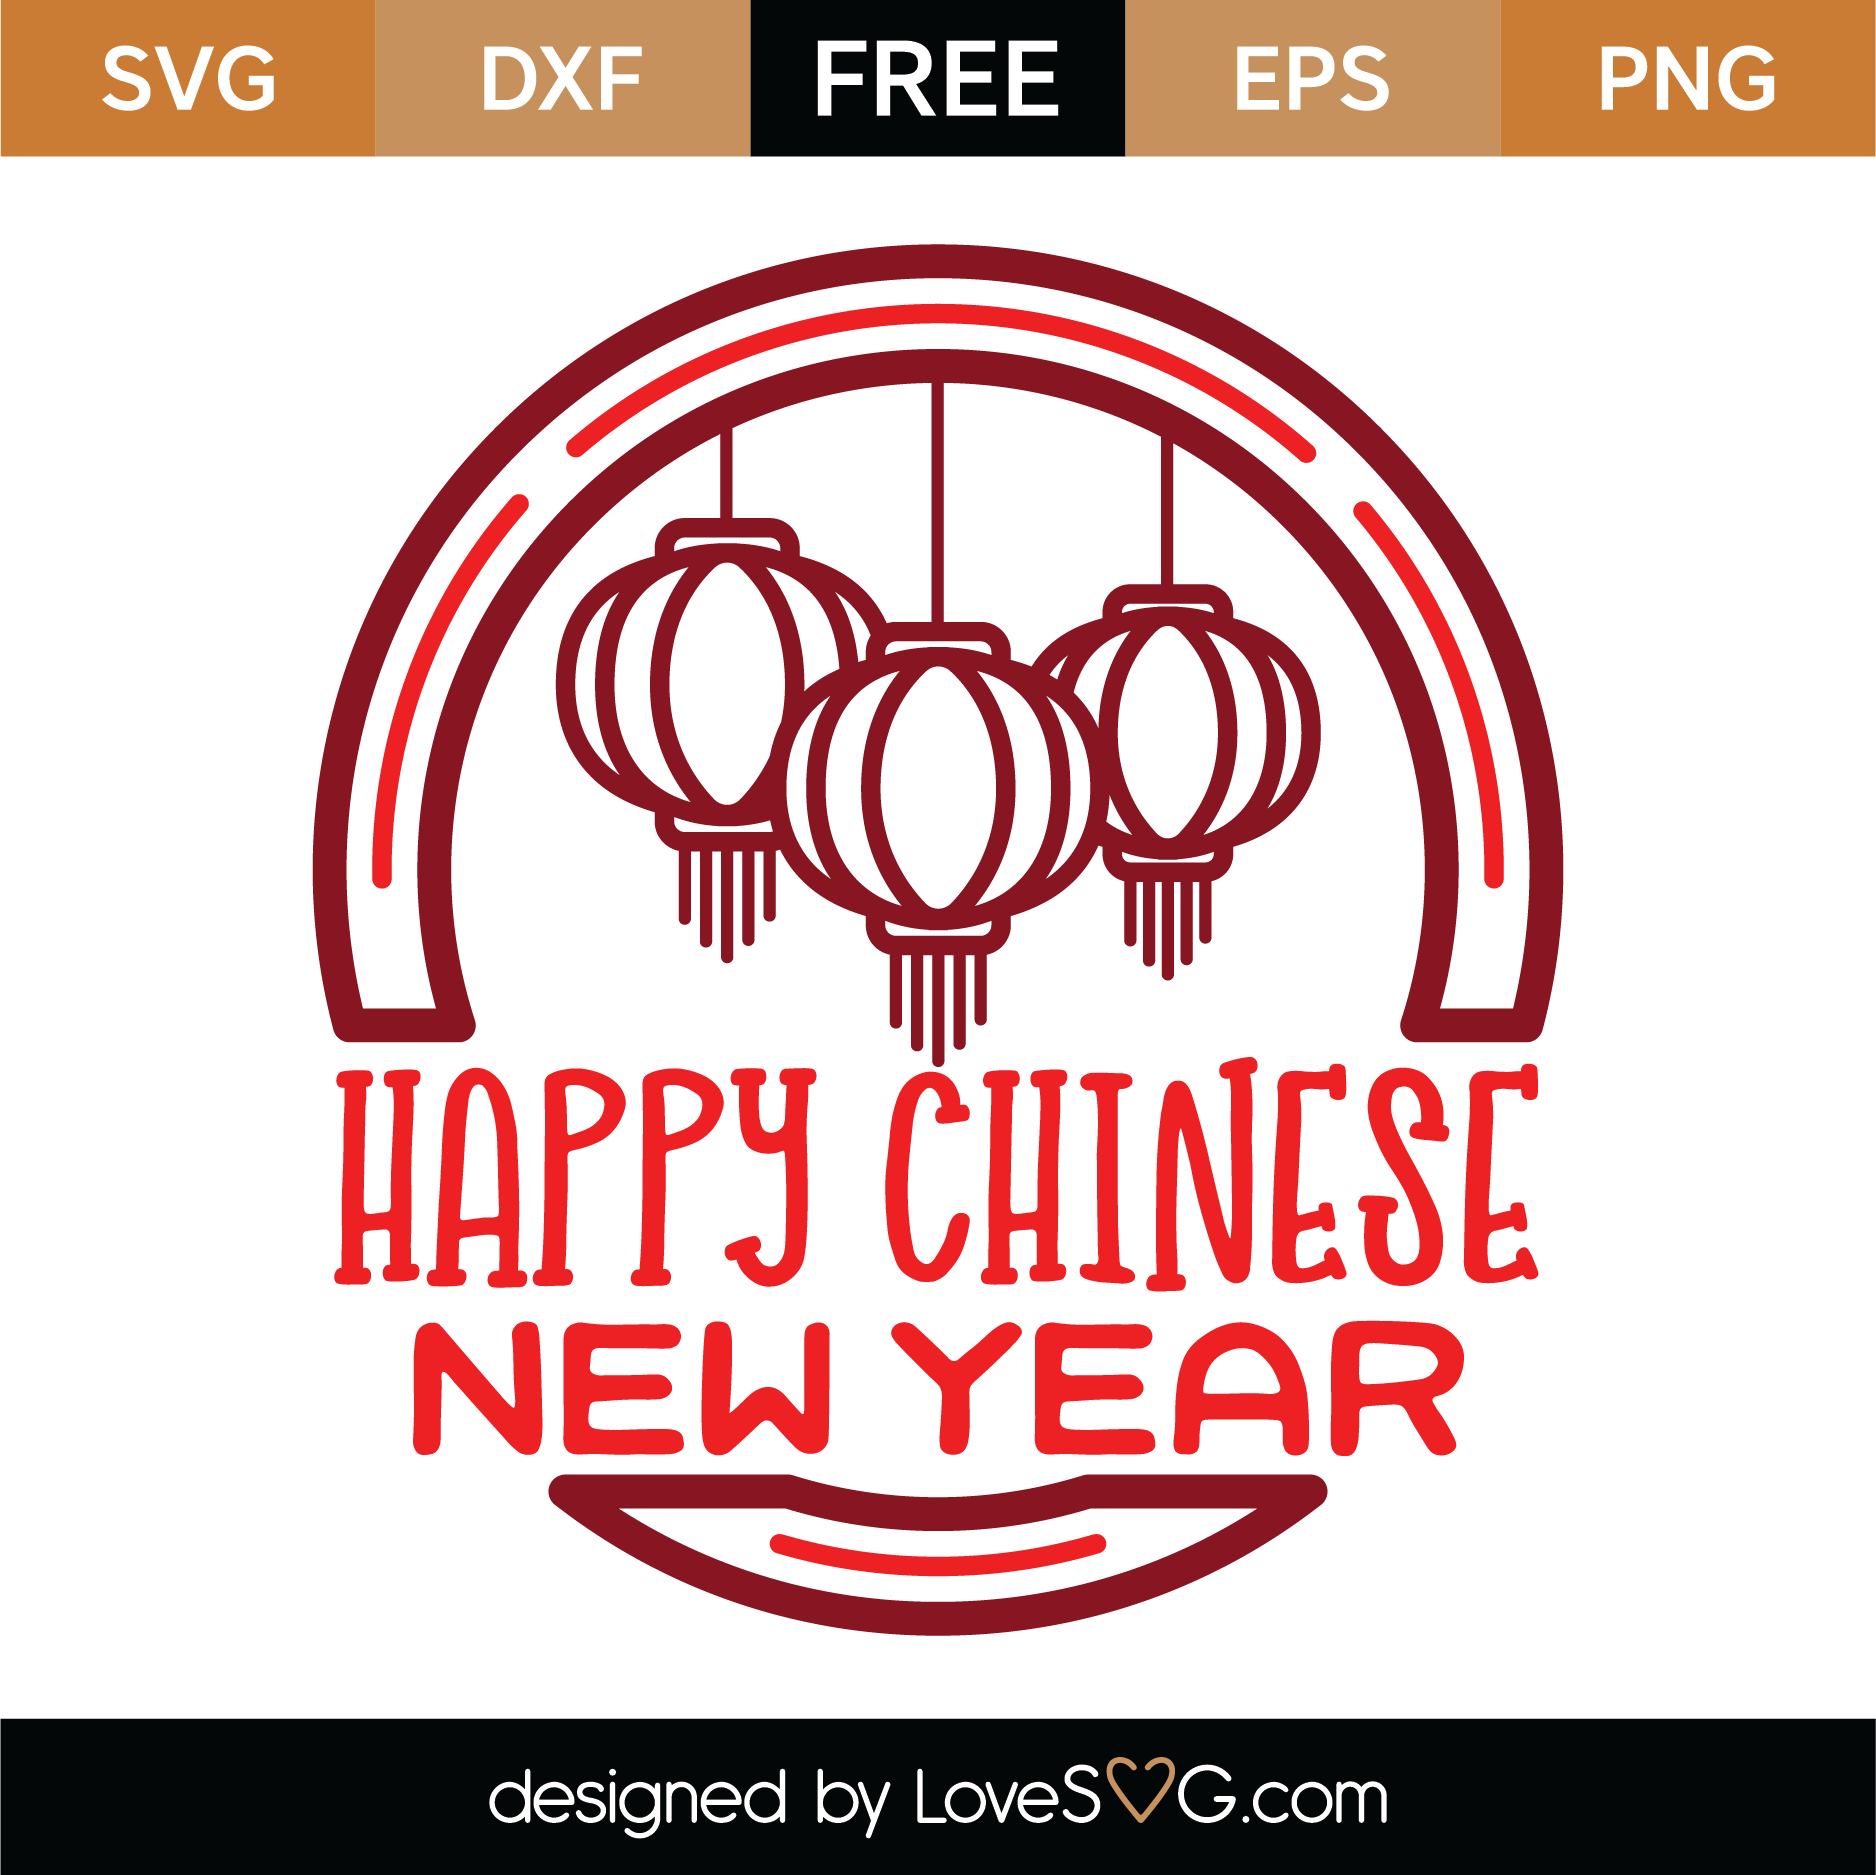 Download Free Happy Chinese New Year SVG Cut File | Lovesvg.com